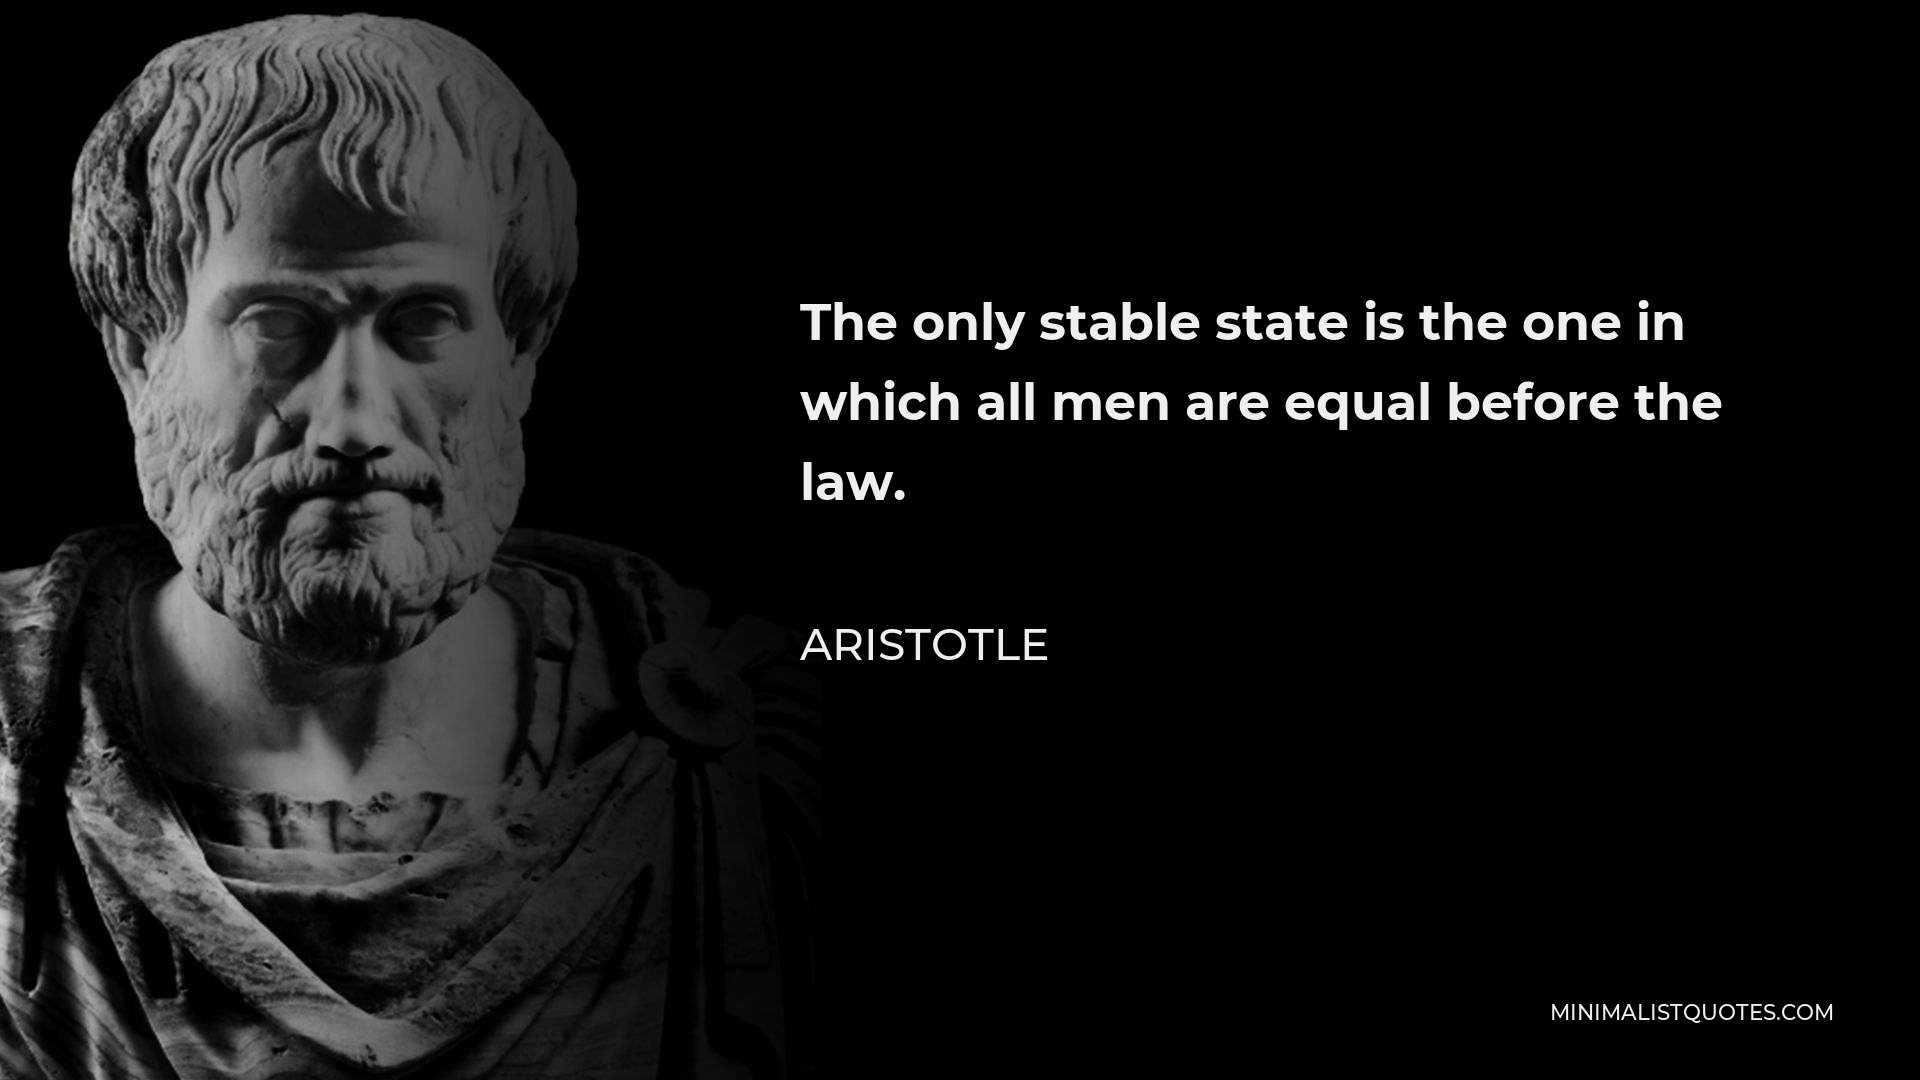 Aristotle Quote - The only stable state is the one in which all men are equal before the law.